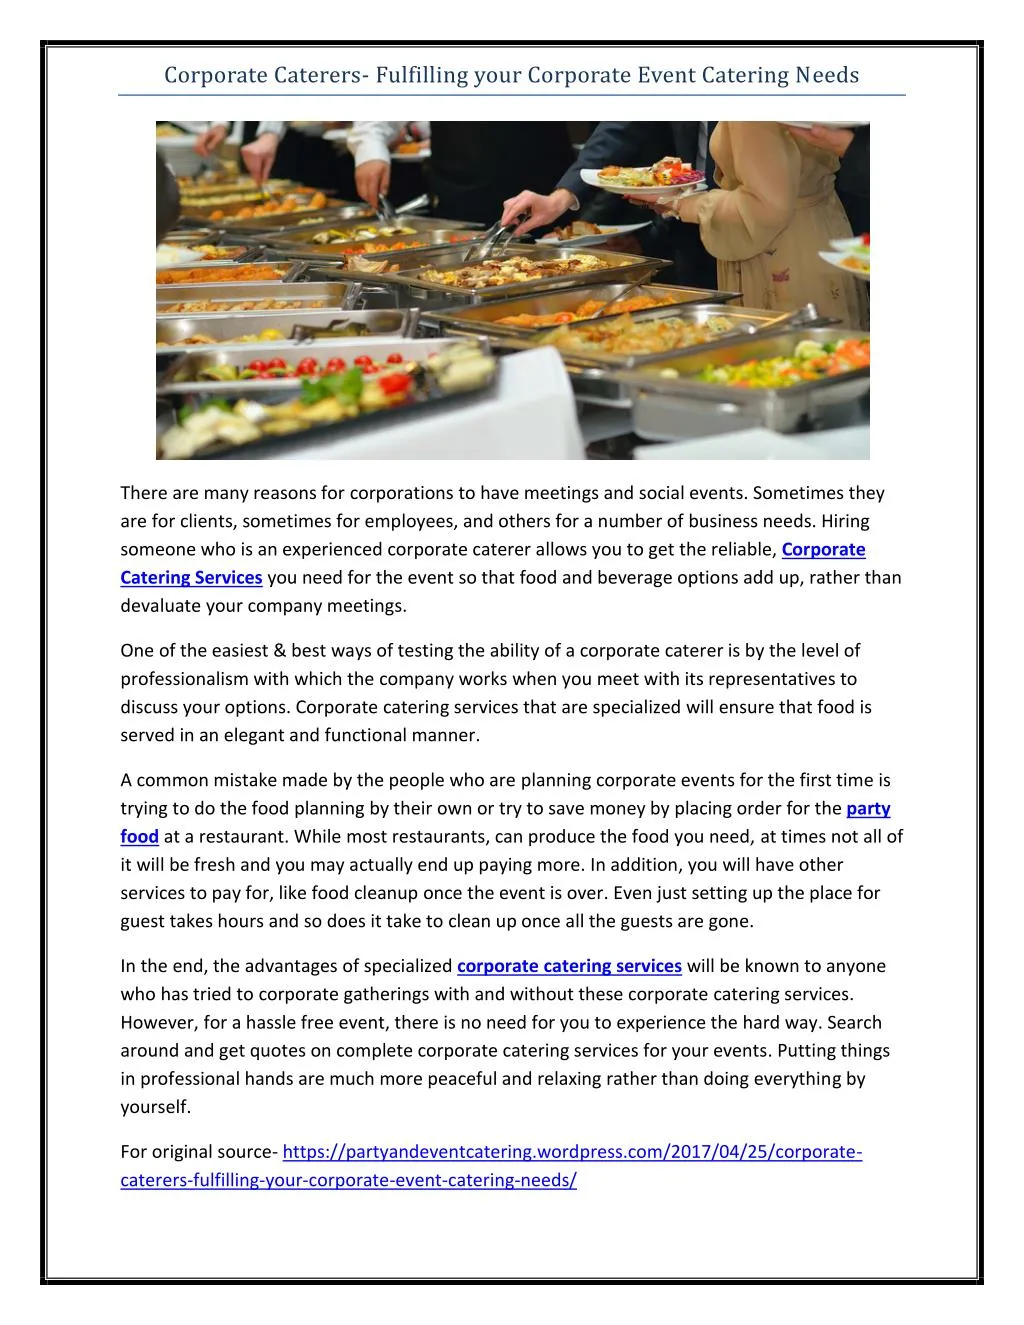 corporate caterers fulfilling your corporate